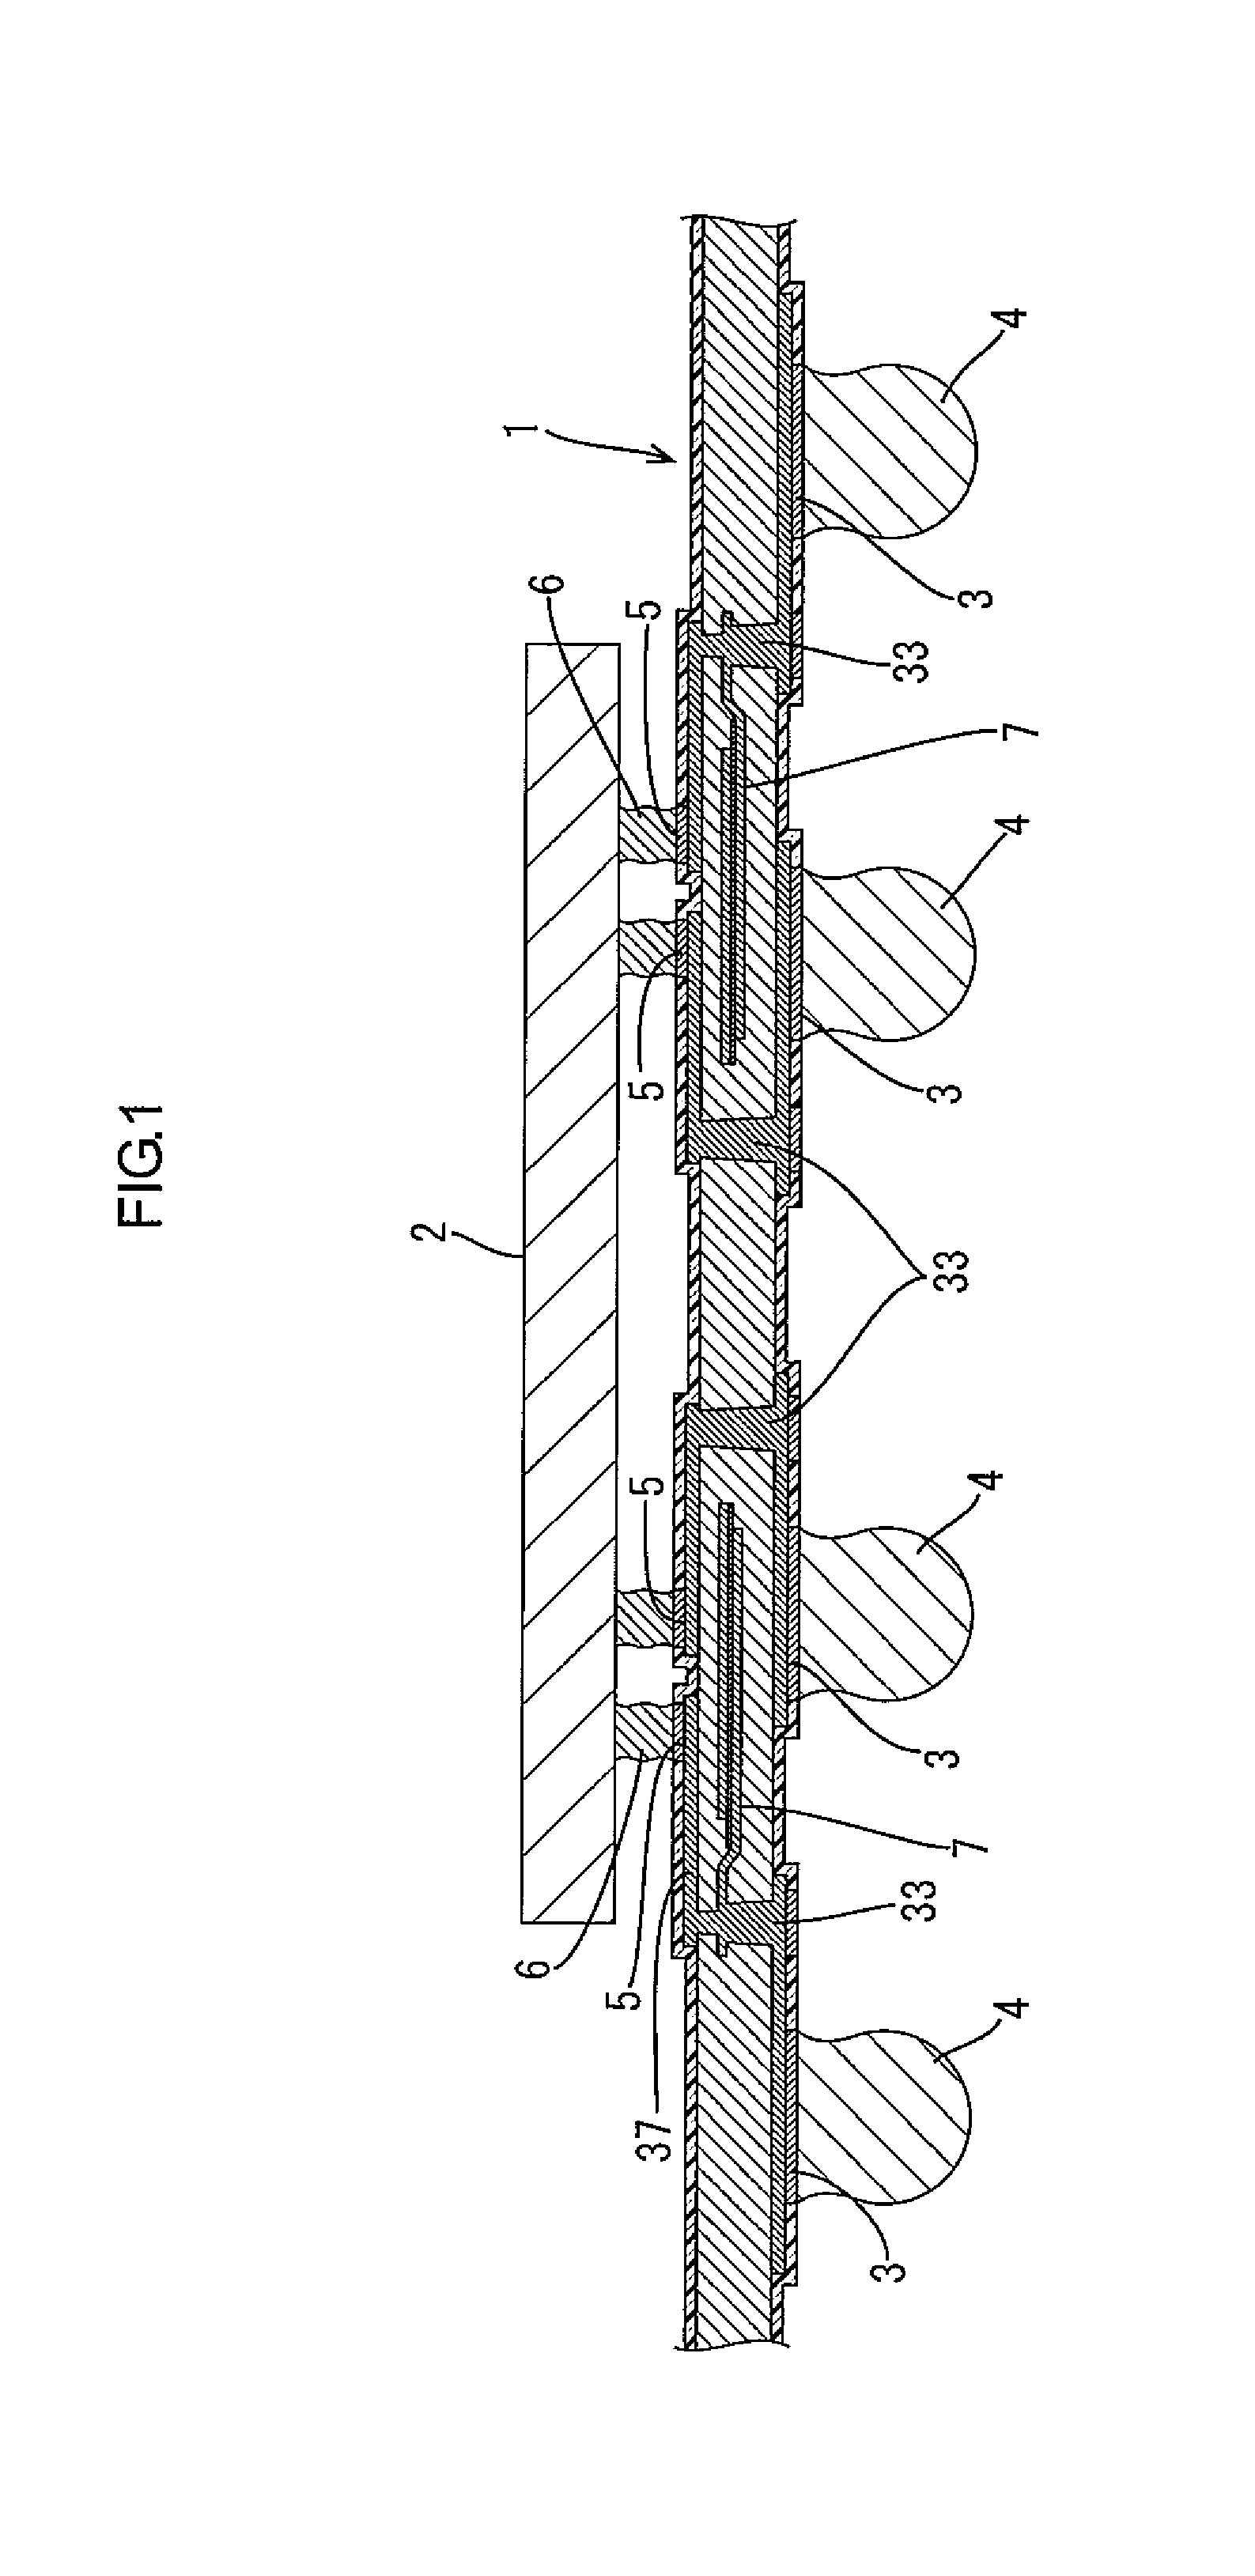 Multi-layered circuit board and semiconductor device